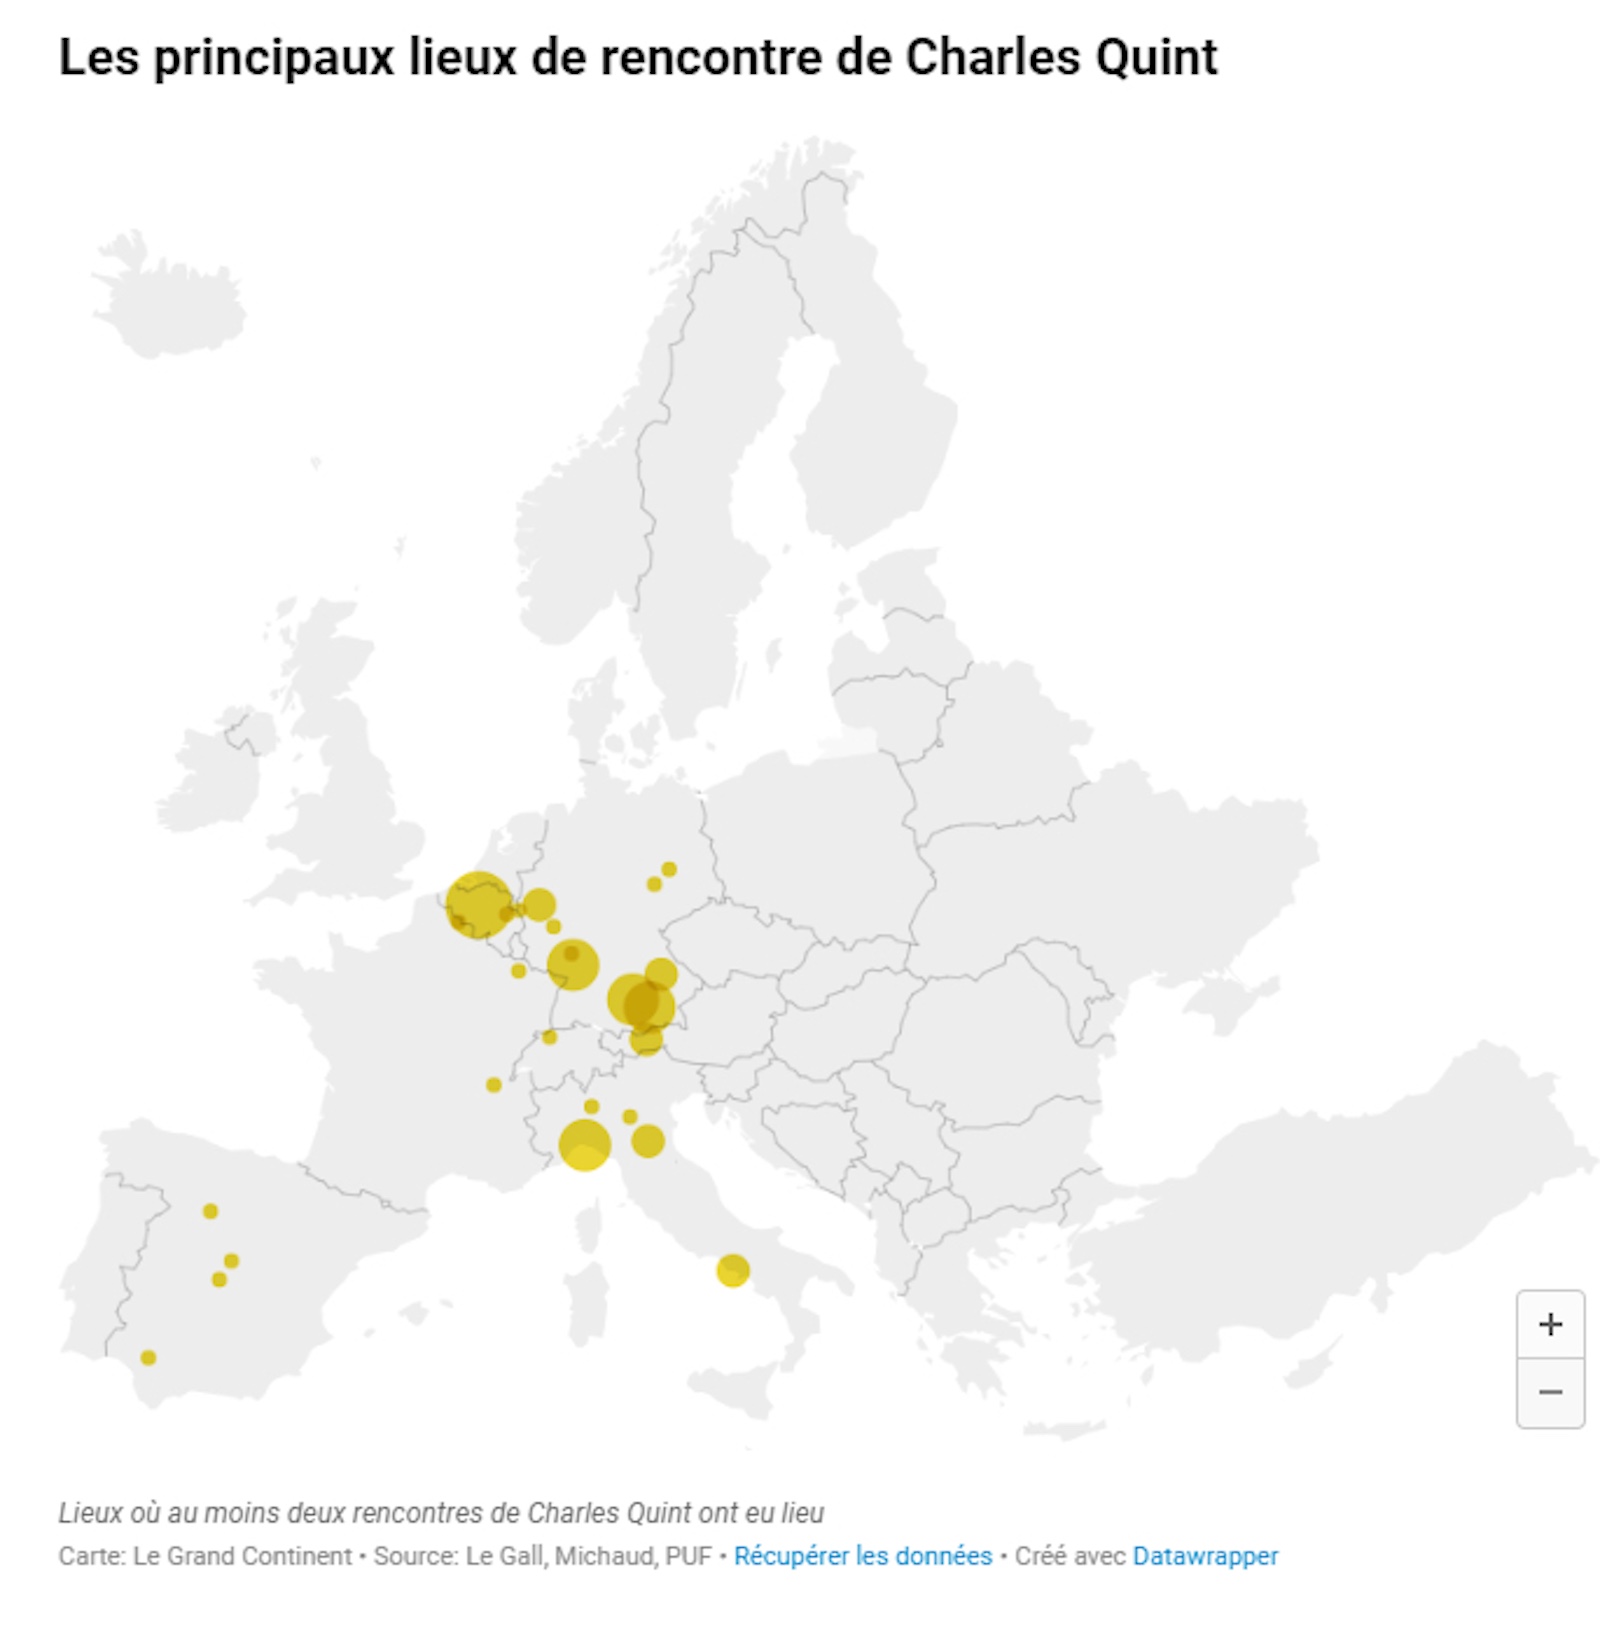 A map showing the locations of charles quint in europe.